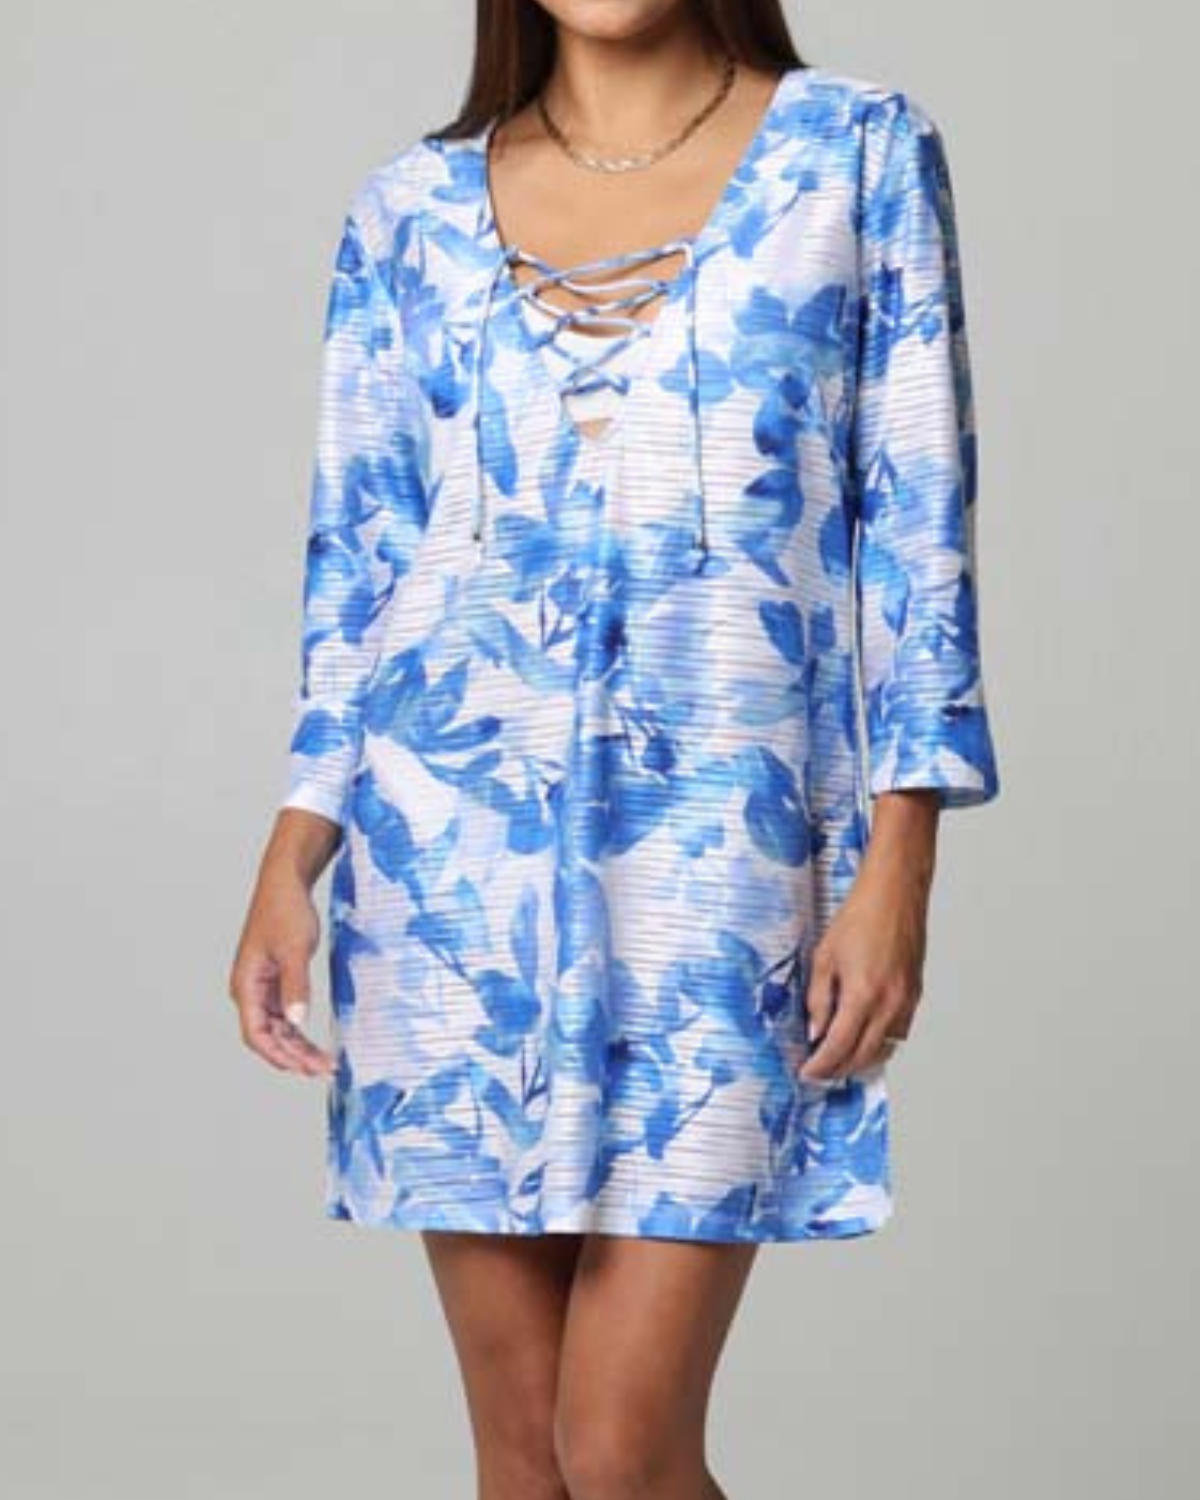 A model wearing a 3/4 sleeve dress with a v neck and lace up detail in a white and blue floral print